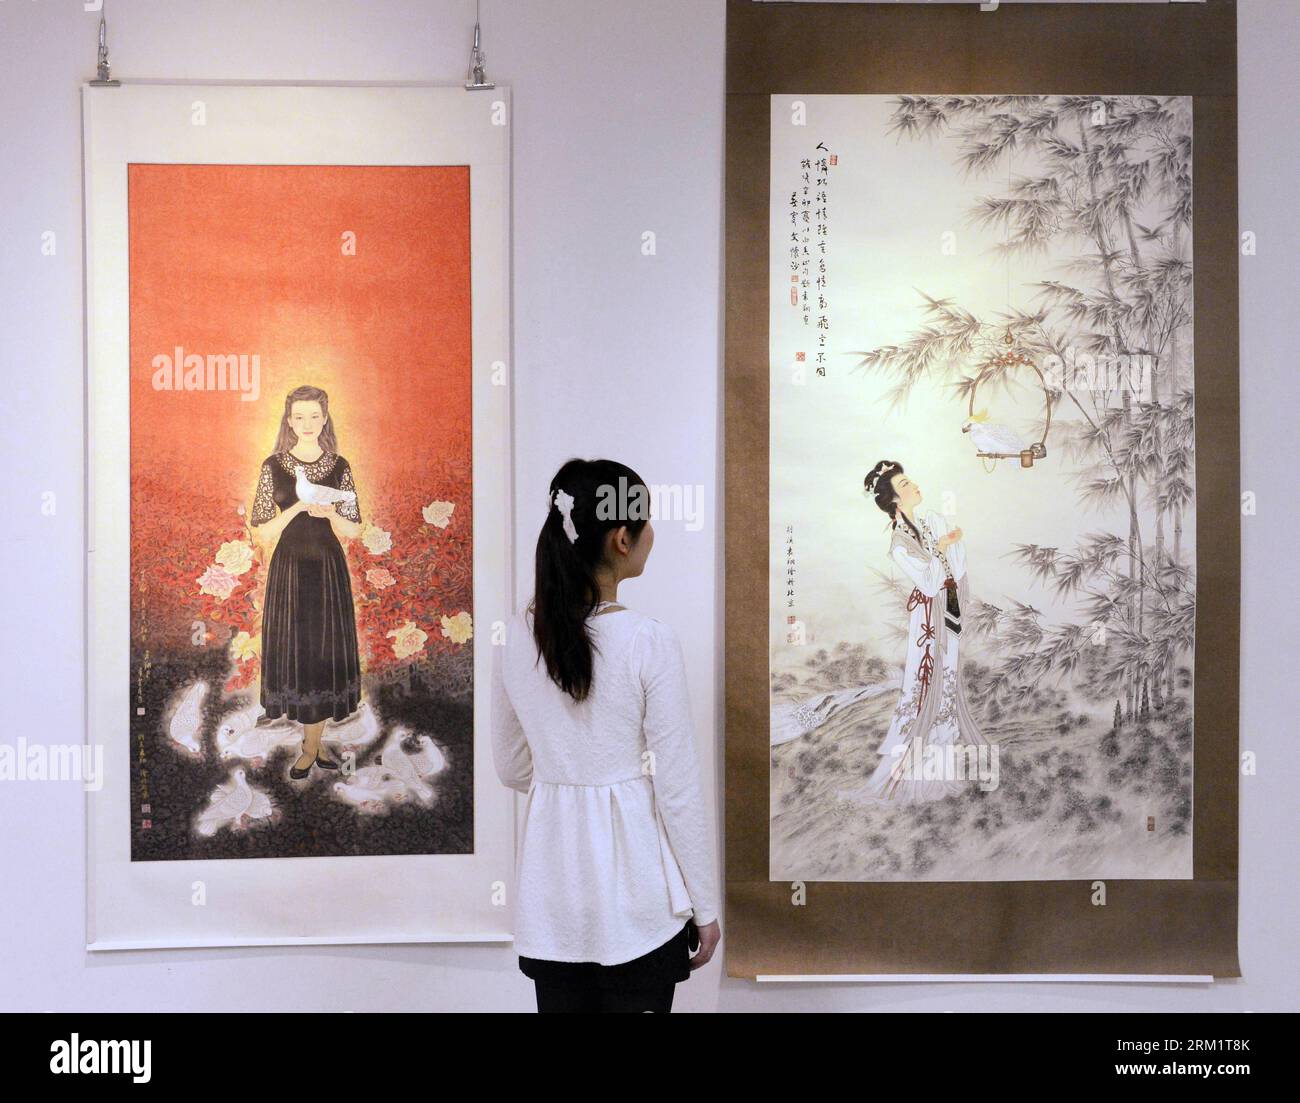 Bildnummer: 59626279  Datum: 10.05.2013  Copyright: imago/Xinhua (130510) -- TOKYO, May 10, 2013 (Xinhua) -- A visitor looks at paintings in the Yuan Xiang Traditional Chinese Realistic Painting Exhibition at the Ueno Royal Museum in Tokyo, Japan, May 10, 2013. Yuan Xiang brought more than 20 traditional Chinese realistic paintings to his exhibition at the Ueno Royal Museum. (Xinhua/Ma Ping)(zhf) JAPAN-TOKYO-CHINESE PAINTING-EXHIBITION PUBLICATIONxNOTxINxCHN Kulst Kunst xas x0x 2013 quer      59626279 Date 10 05 2013 Copyright Imago XINHUA  Tokyo May 10 2013 XINHUA a Visitor Looks AT Paintings Stock Photo